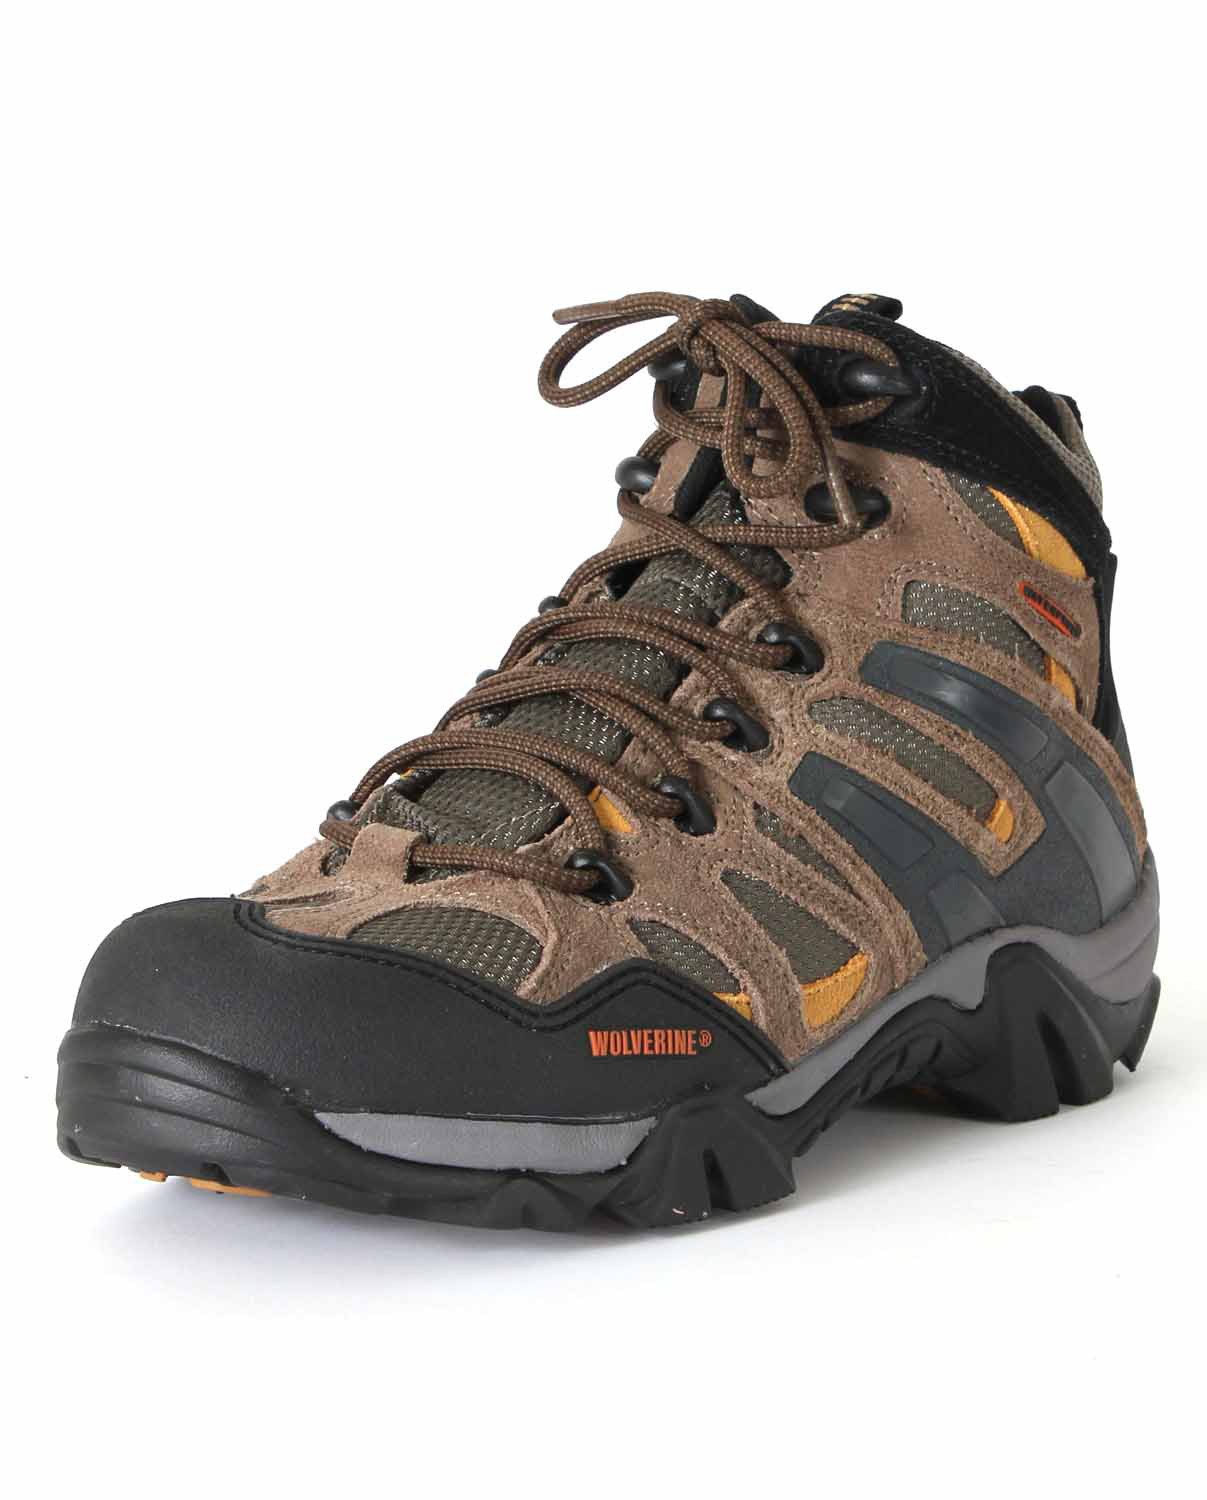 wolverine hiking boots